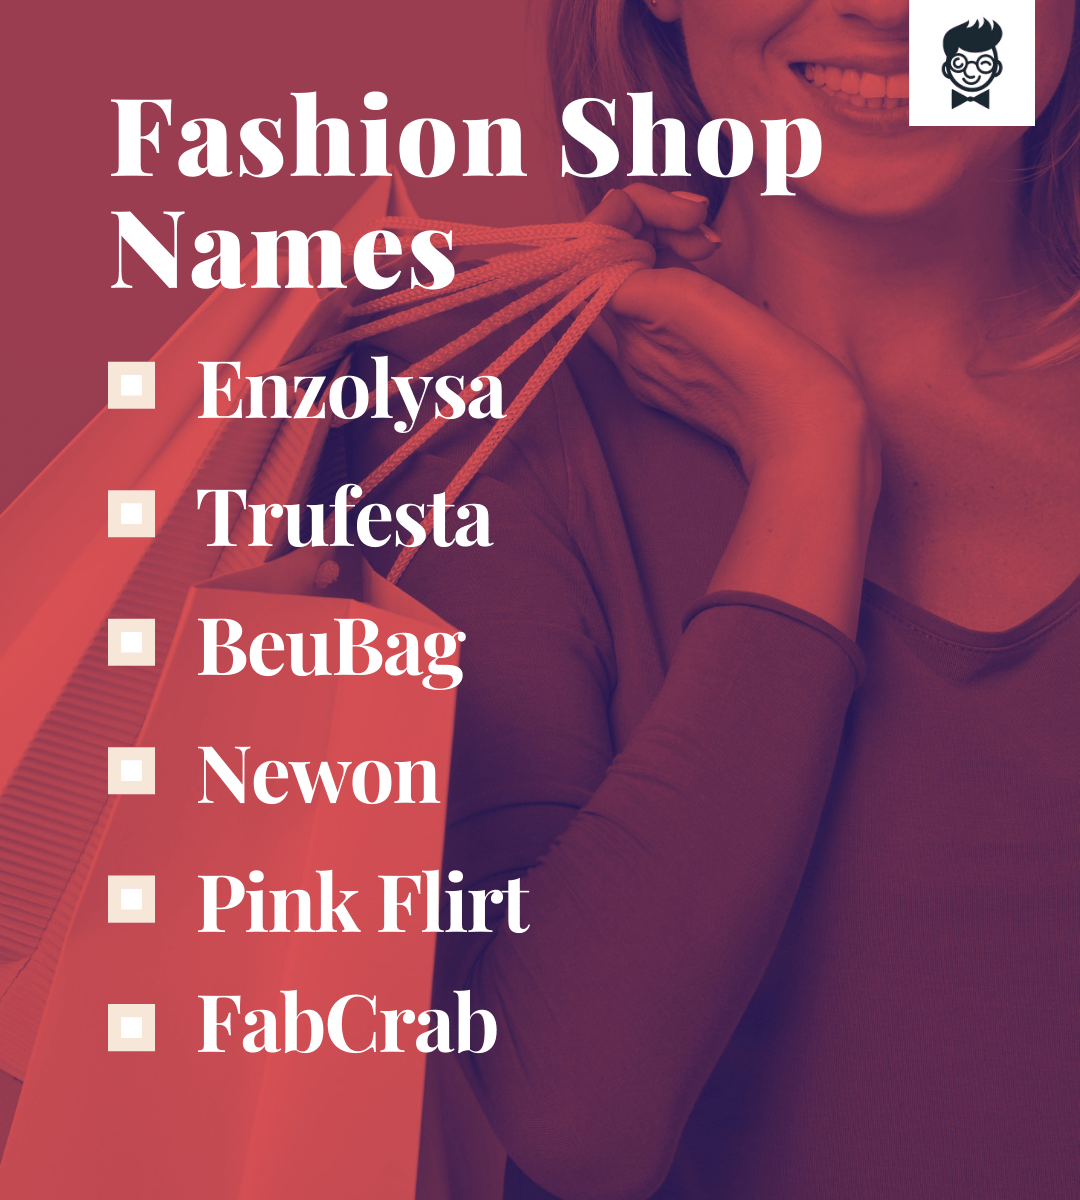 1700+ Trending Fashion Shop Names That Make You Stand Out